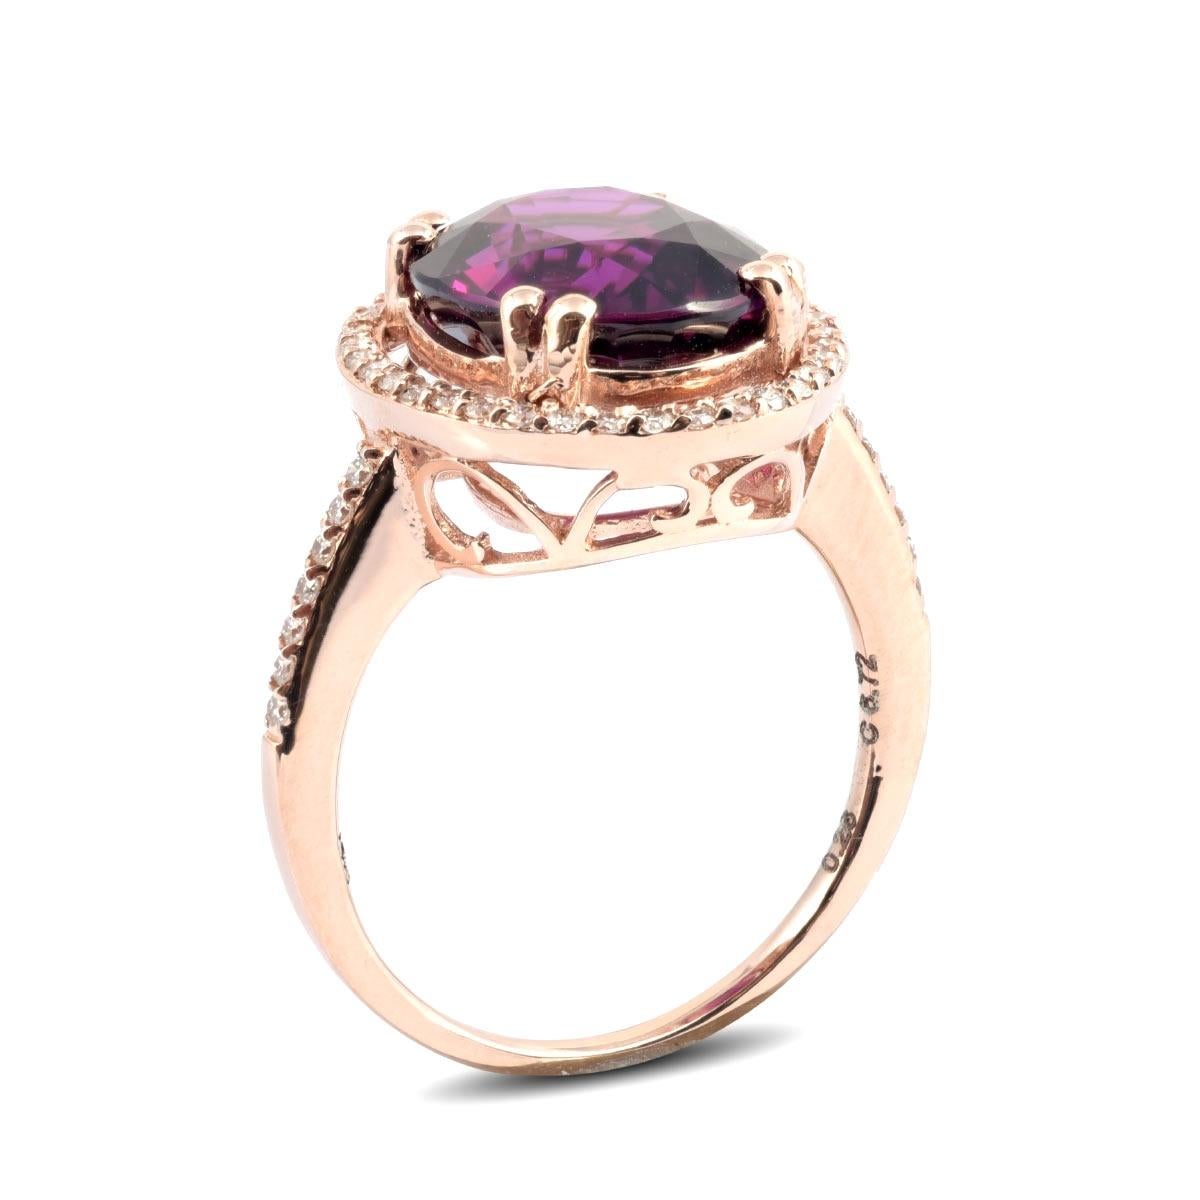 A bold and beautiful piece, this statement grape colored Garnet ring will surely be a forever favorite. Set in the complementing 14K rose gold, and with perfectly matched diamonds around at 6.72 carats it is an apt size. Just right for a woman who